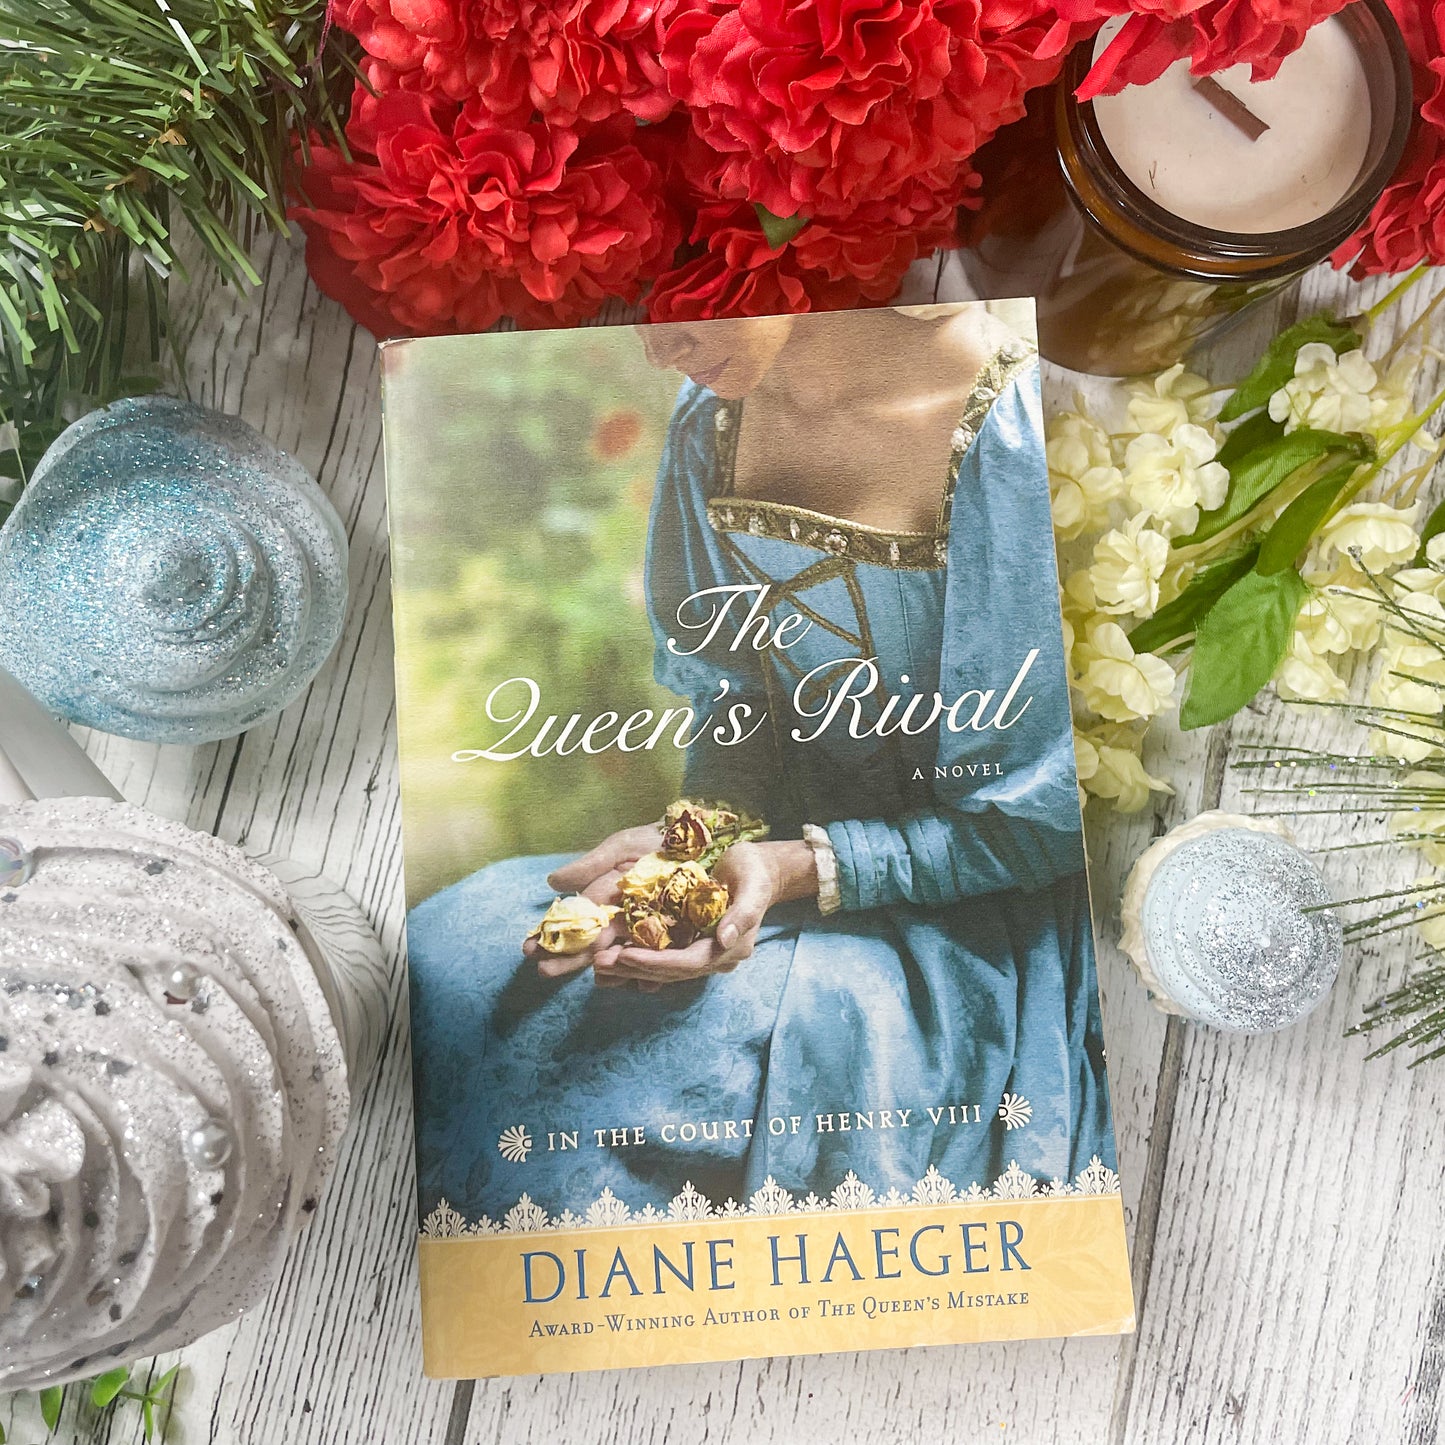 The Queen's Rival (In the Court of Henry VIII #3) by Diane Haeger